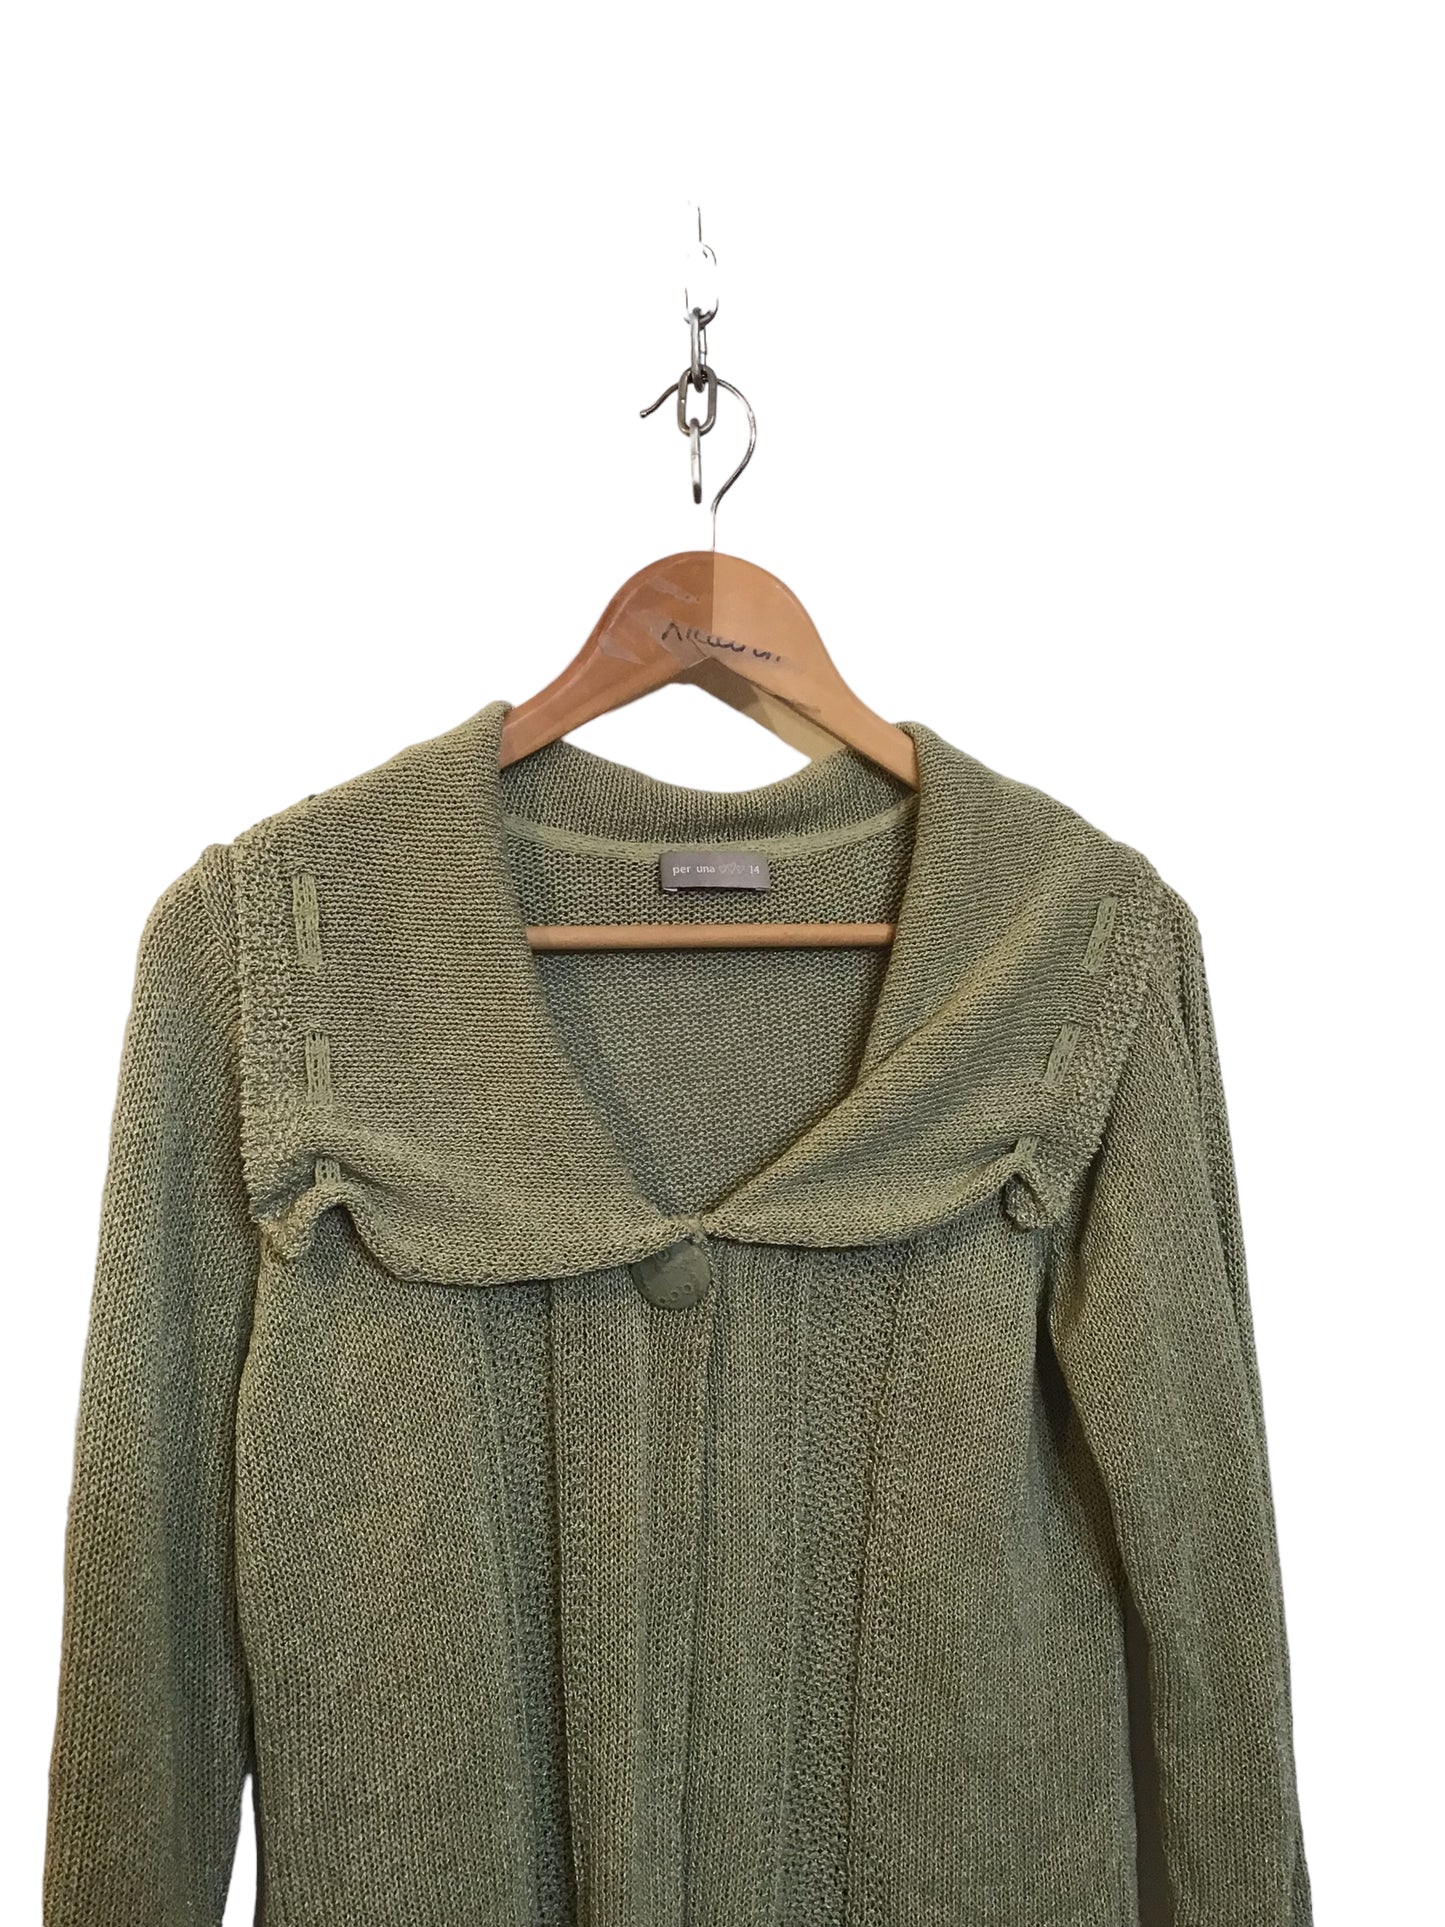 Green Knitted Cardigan (Size L)